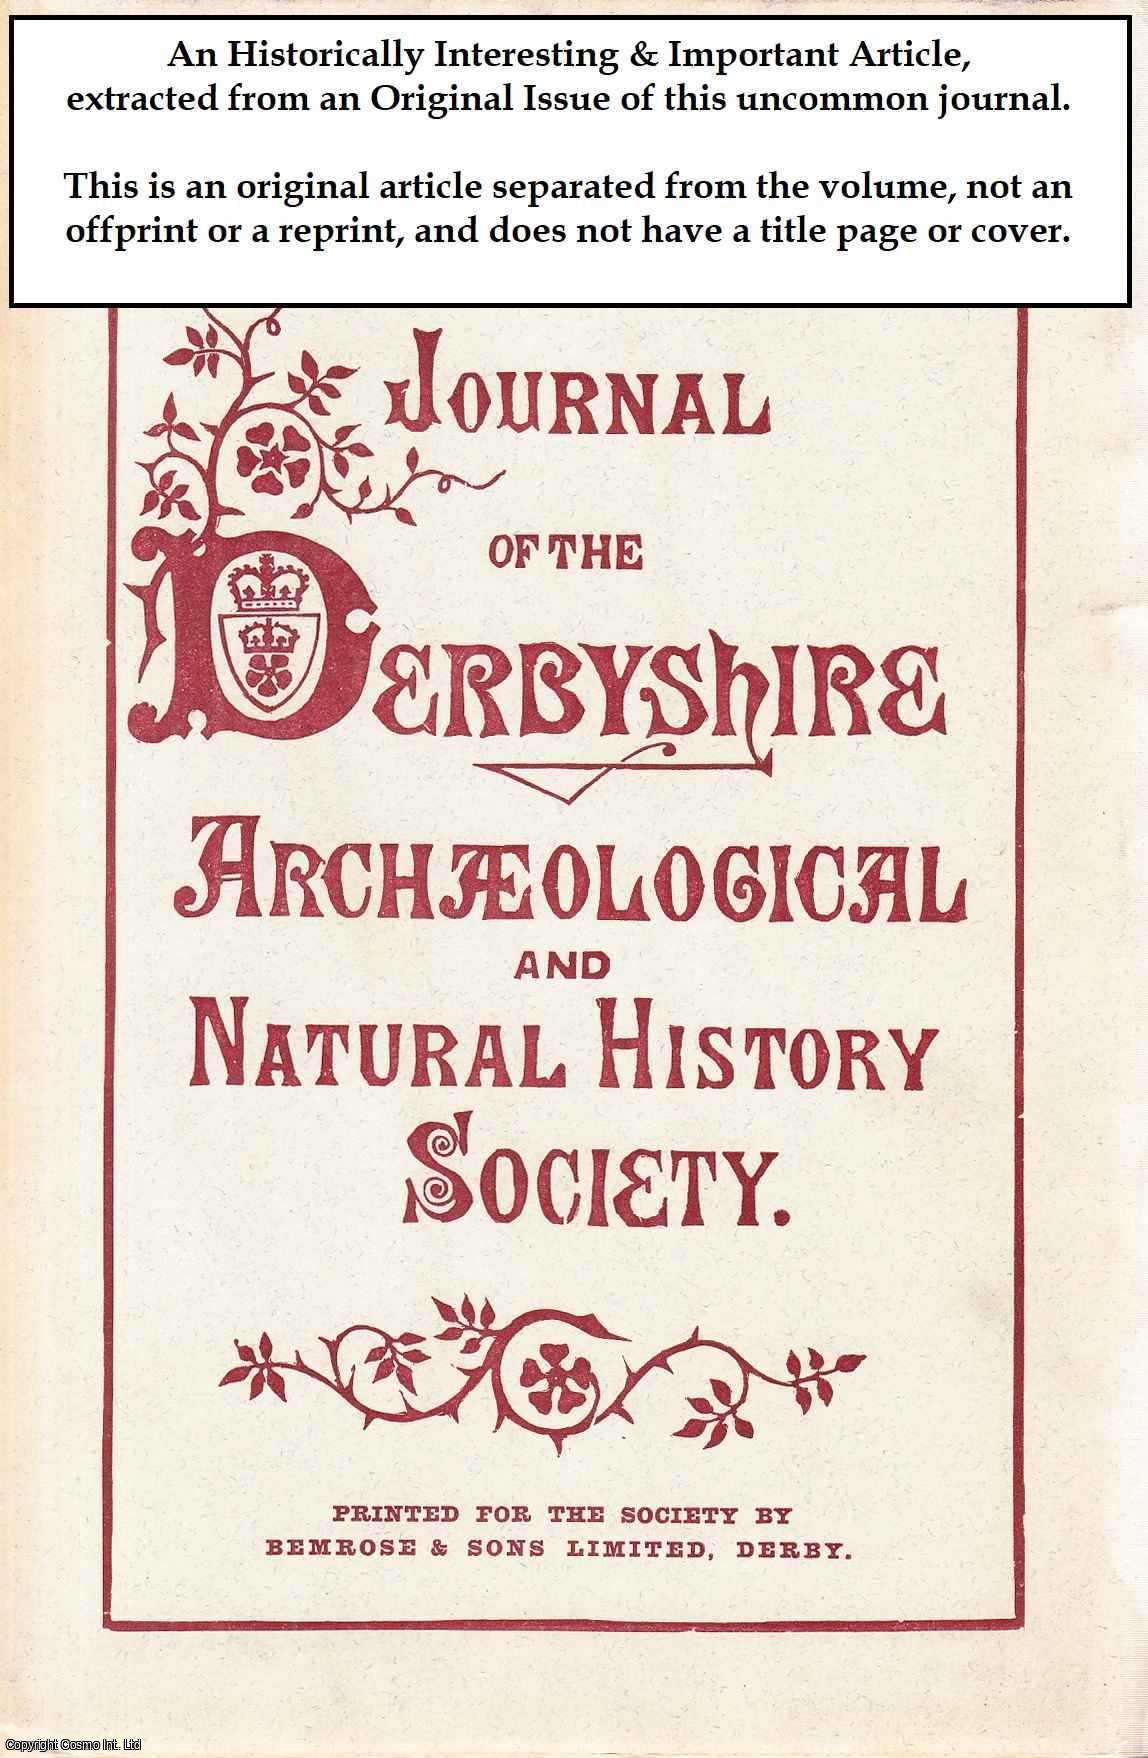 E. G. - Old Deeds in The Parish Chest of St. Wynstan's Repton. An original article from the Journal of the Derbyshire Archaeological & Natural History Society, 1887.